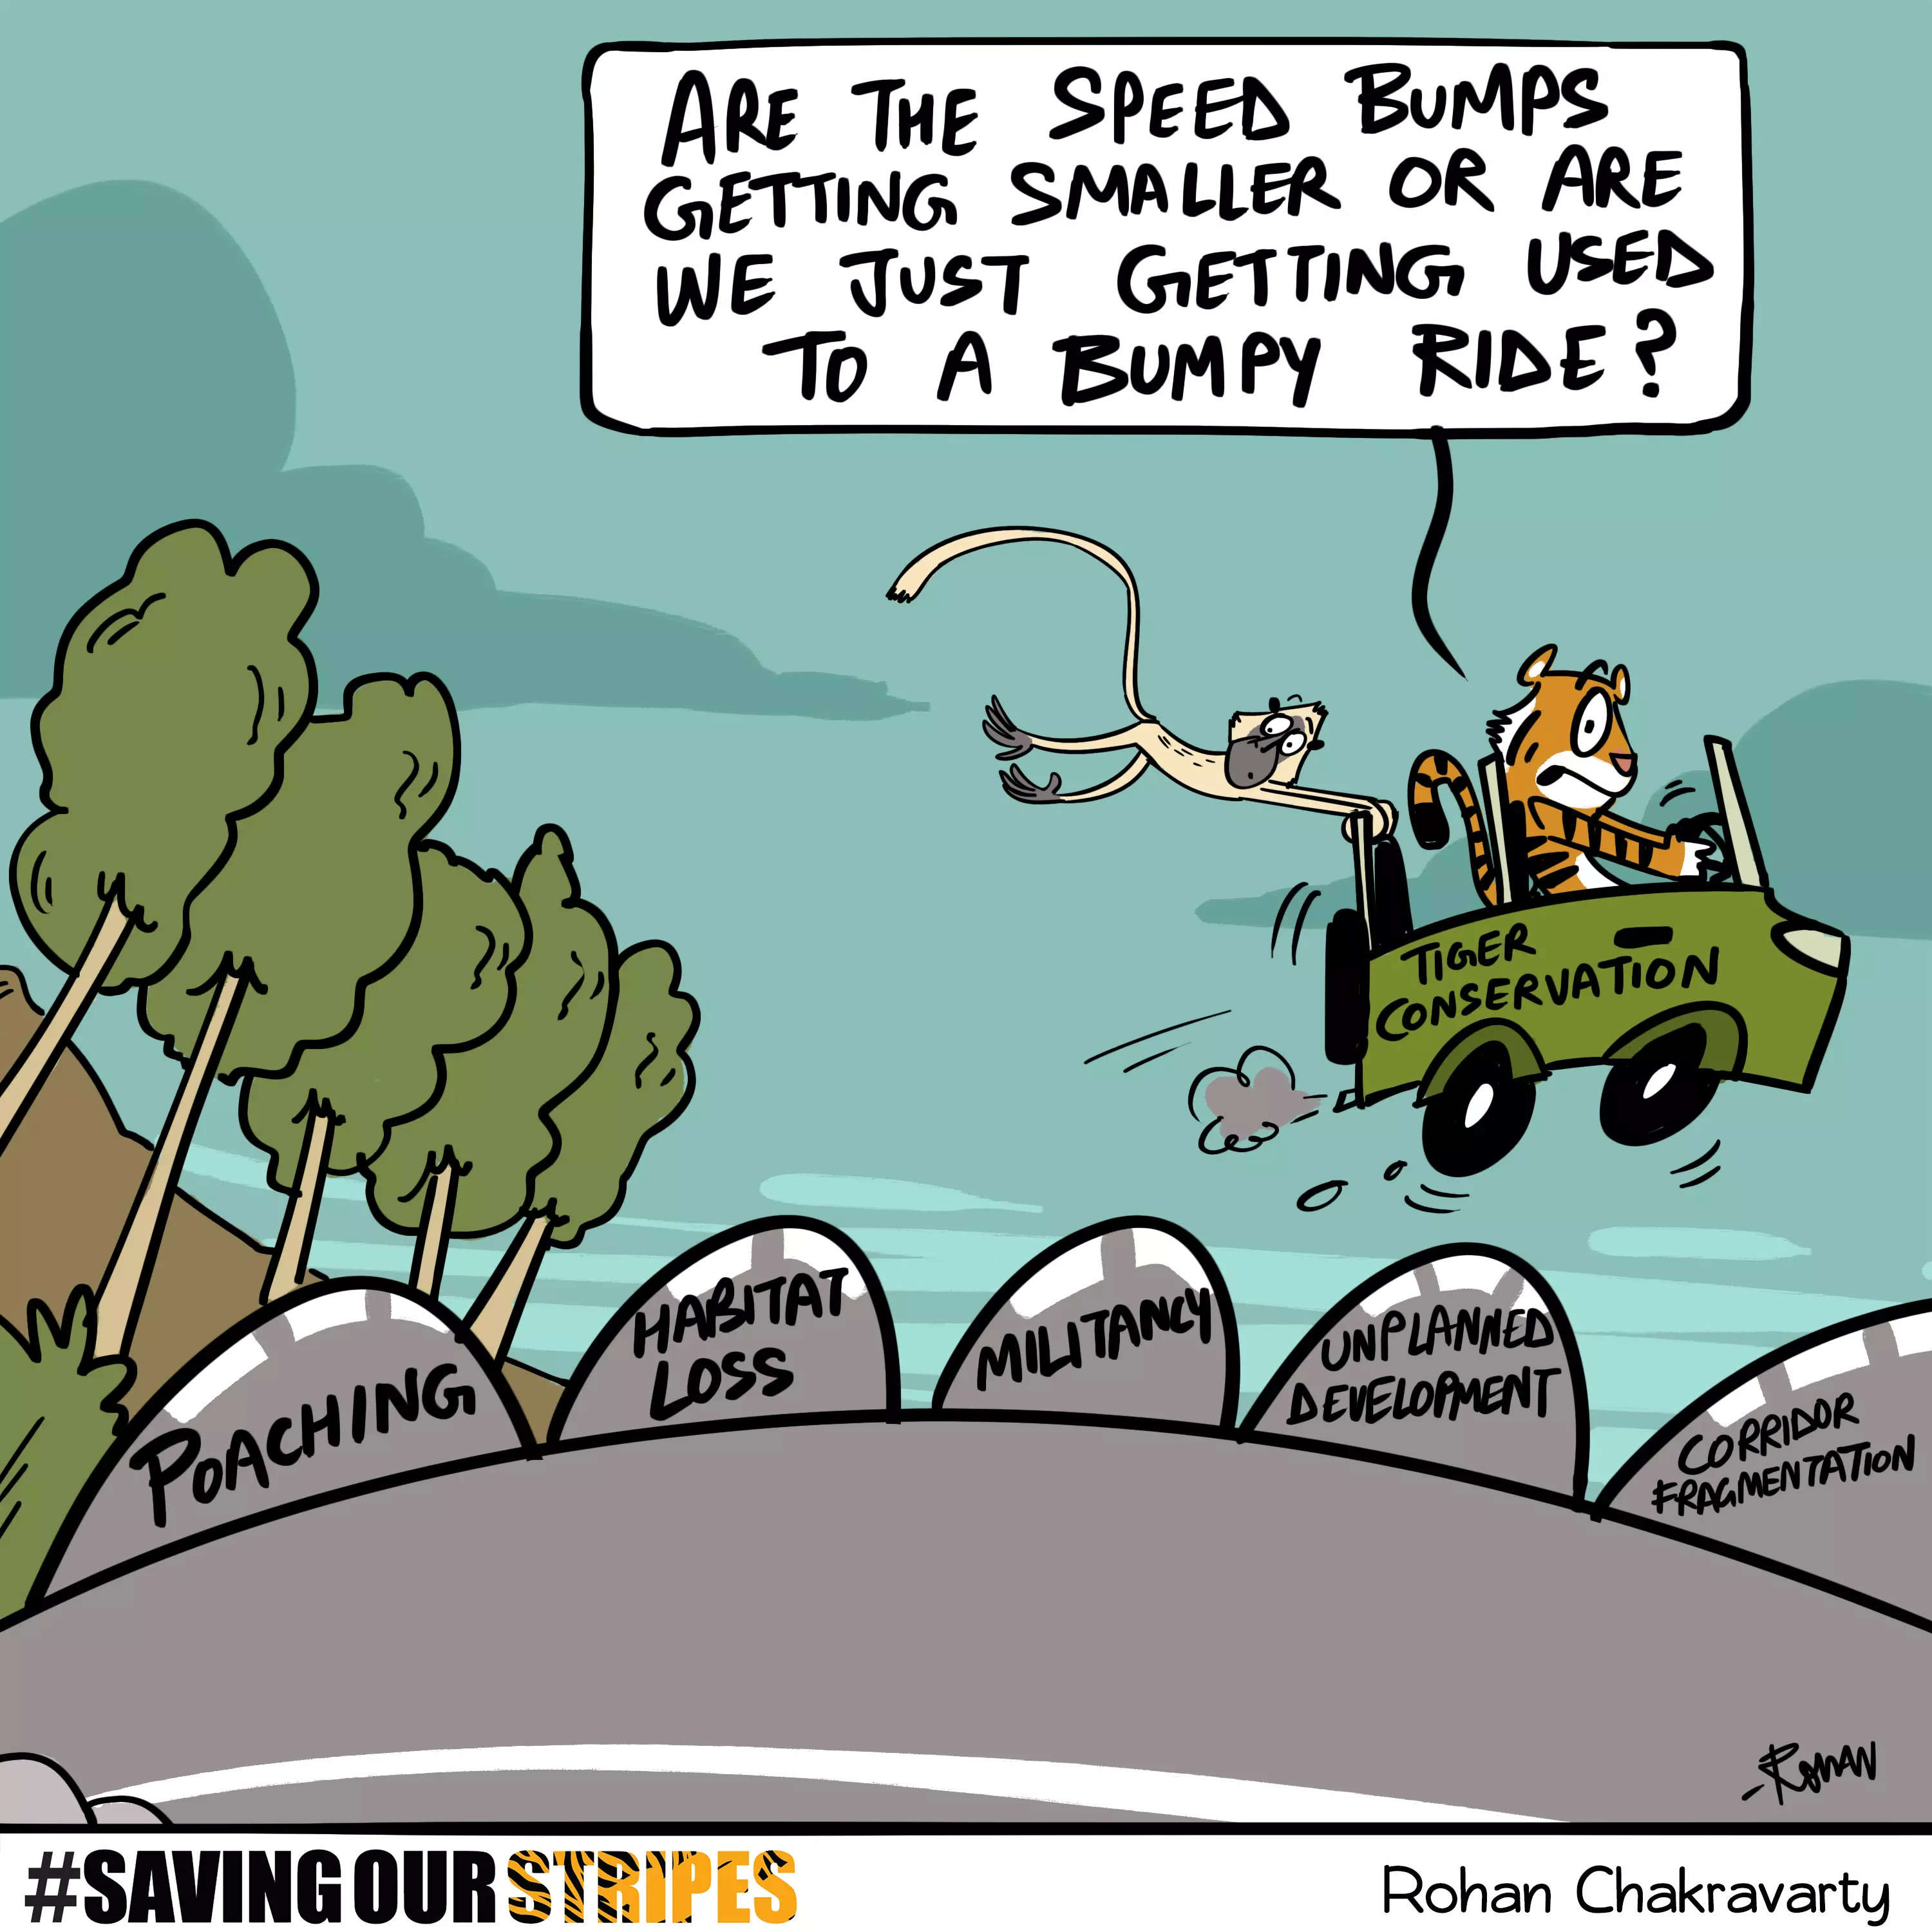 When life gives you speed bumps, be a tiger and roar over them! These big cats are experts at navigating even the bumpiest of rides